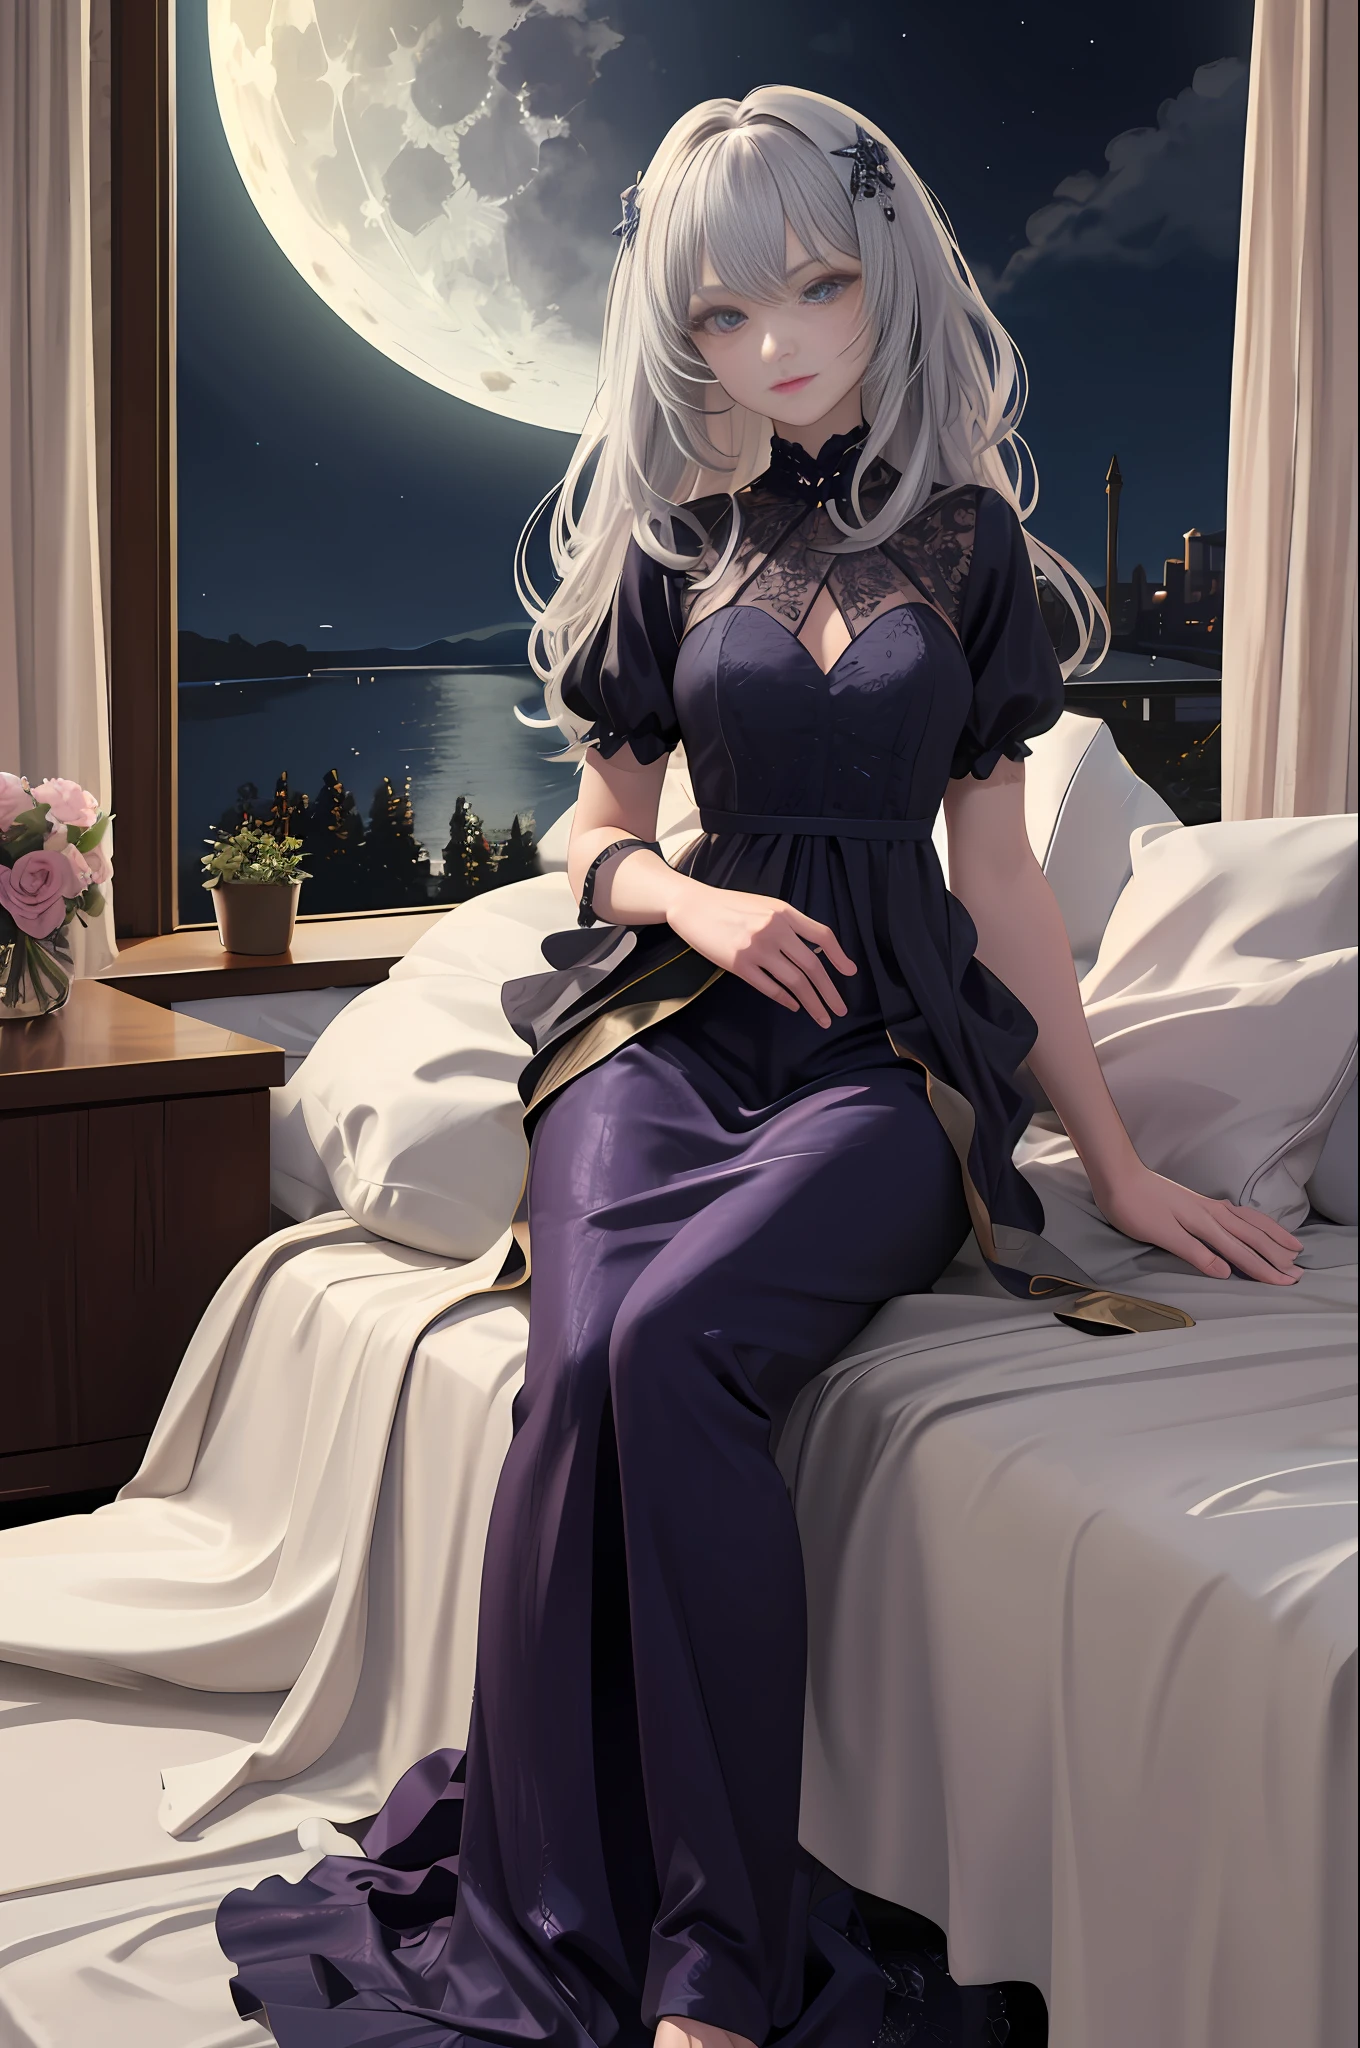 High resolution, best quality, illustration, cinematic light, super detailed, detailed face, (detailed eyes), highest quality, super detailed, masterpiece, (detailed face), girl alone, girl, gray hair, purple eyes, best detail, glowing eyes, moderate breathing, sitting in bed, sitting, bed, window, night sky, lake outside, moon, full moon, backlit, rays, (high contrast), (colorful), full body